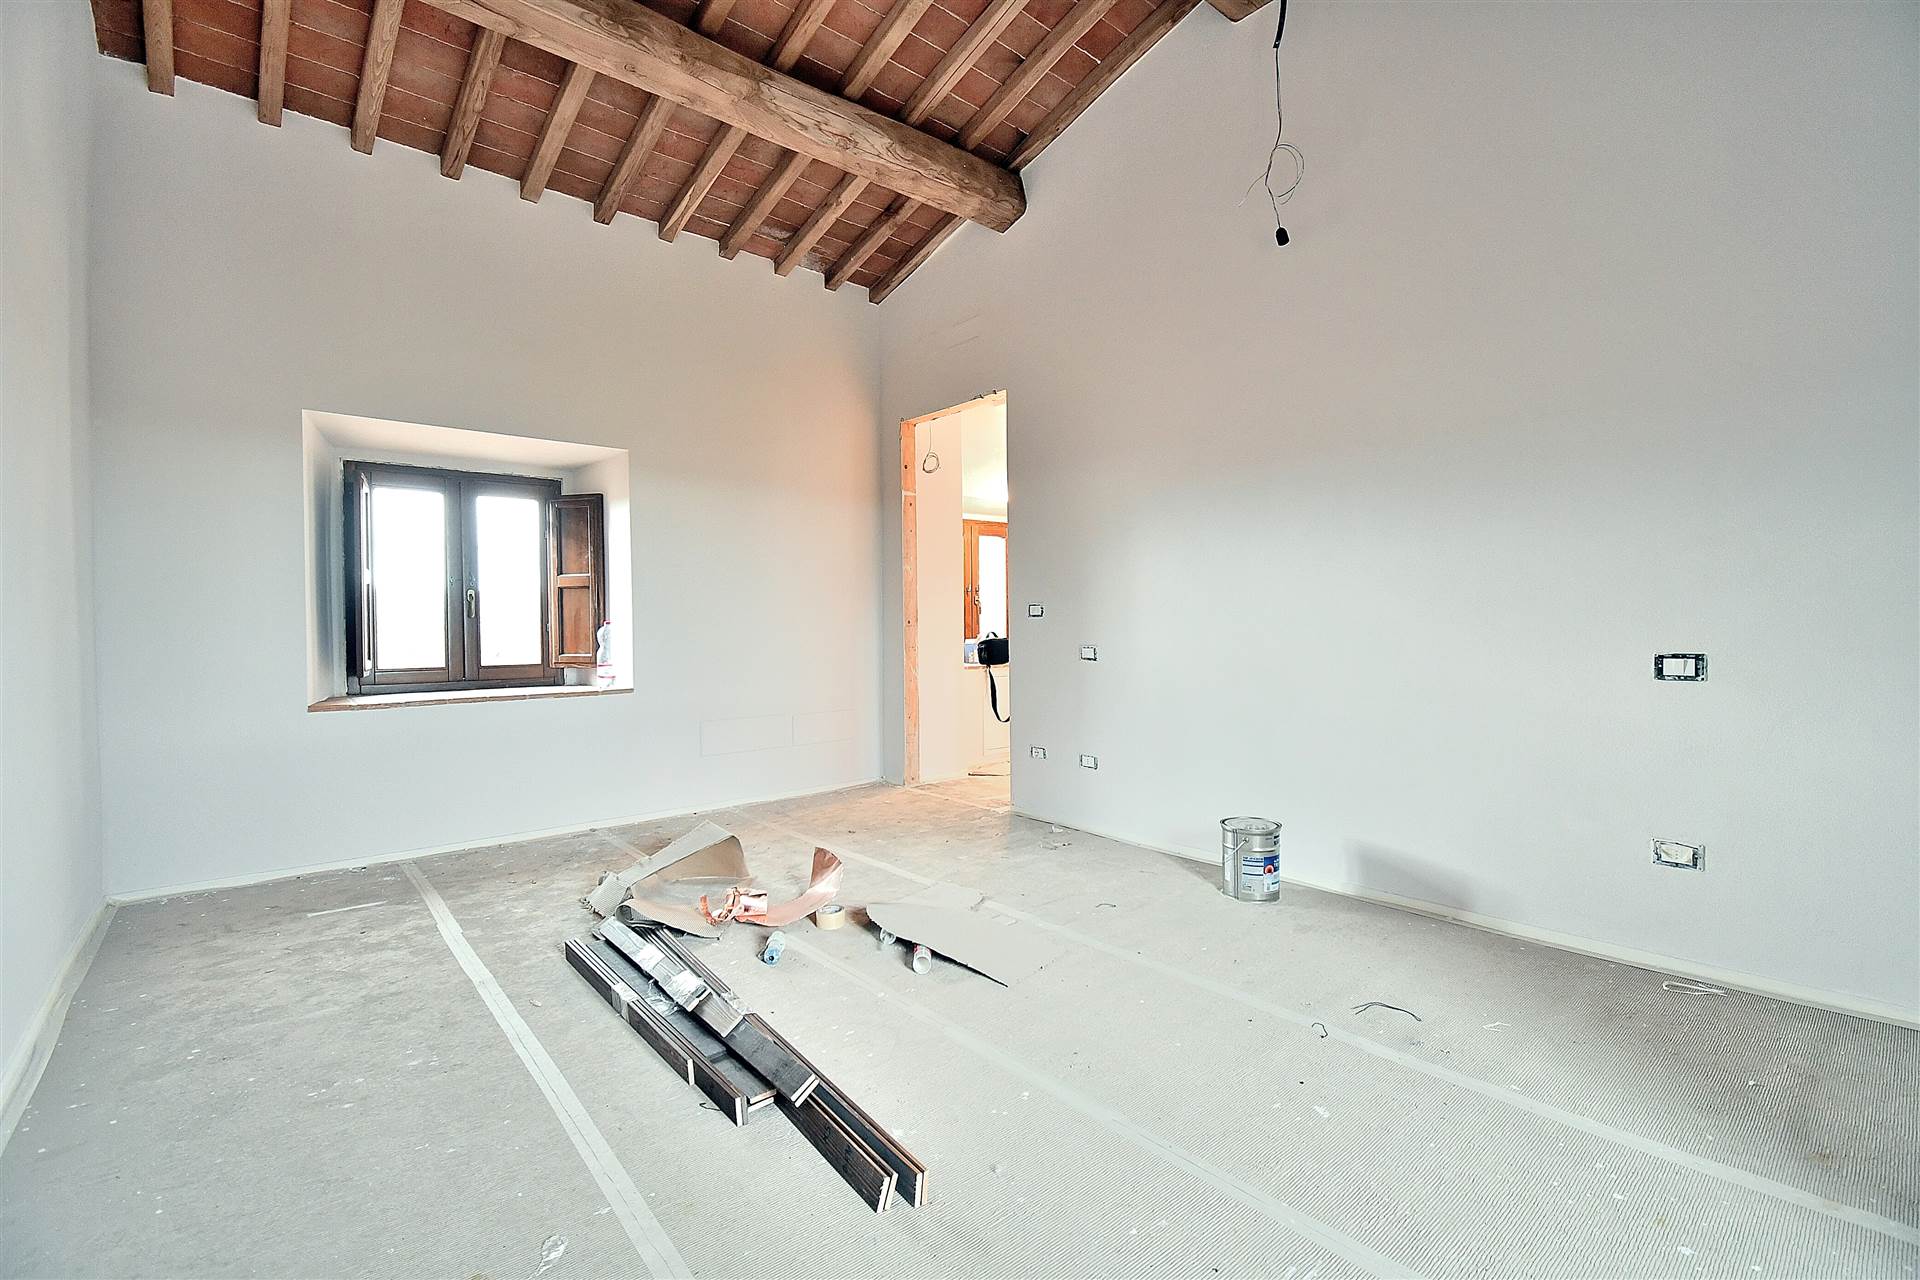 BIBBIANO, COLLE DI VAL D'ELSA, Apartment for sale of 110 Sq. mt., New construction, Heating Individual heating system, placed at 1° on 2, composed 